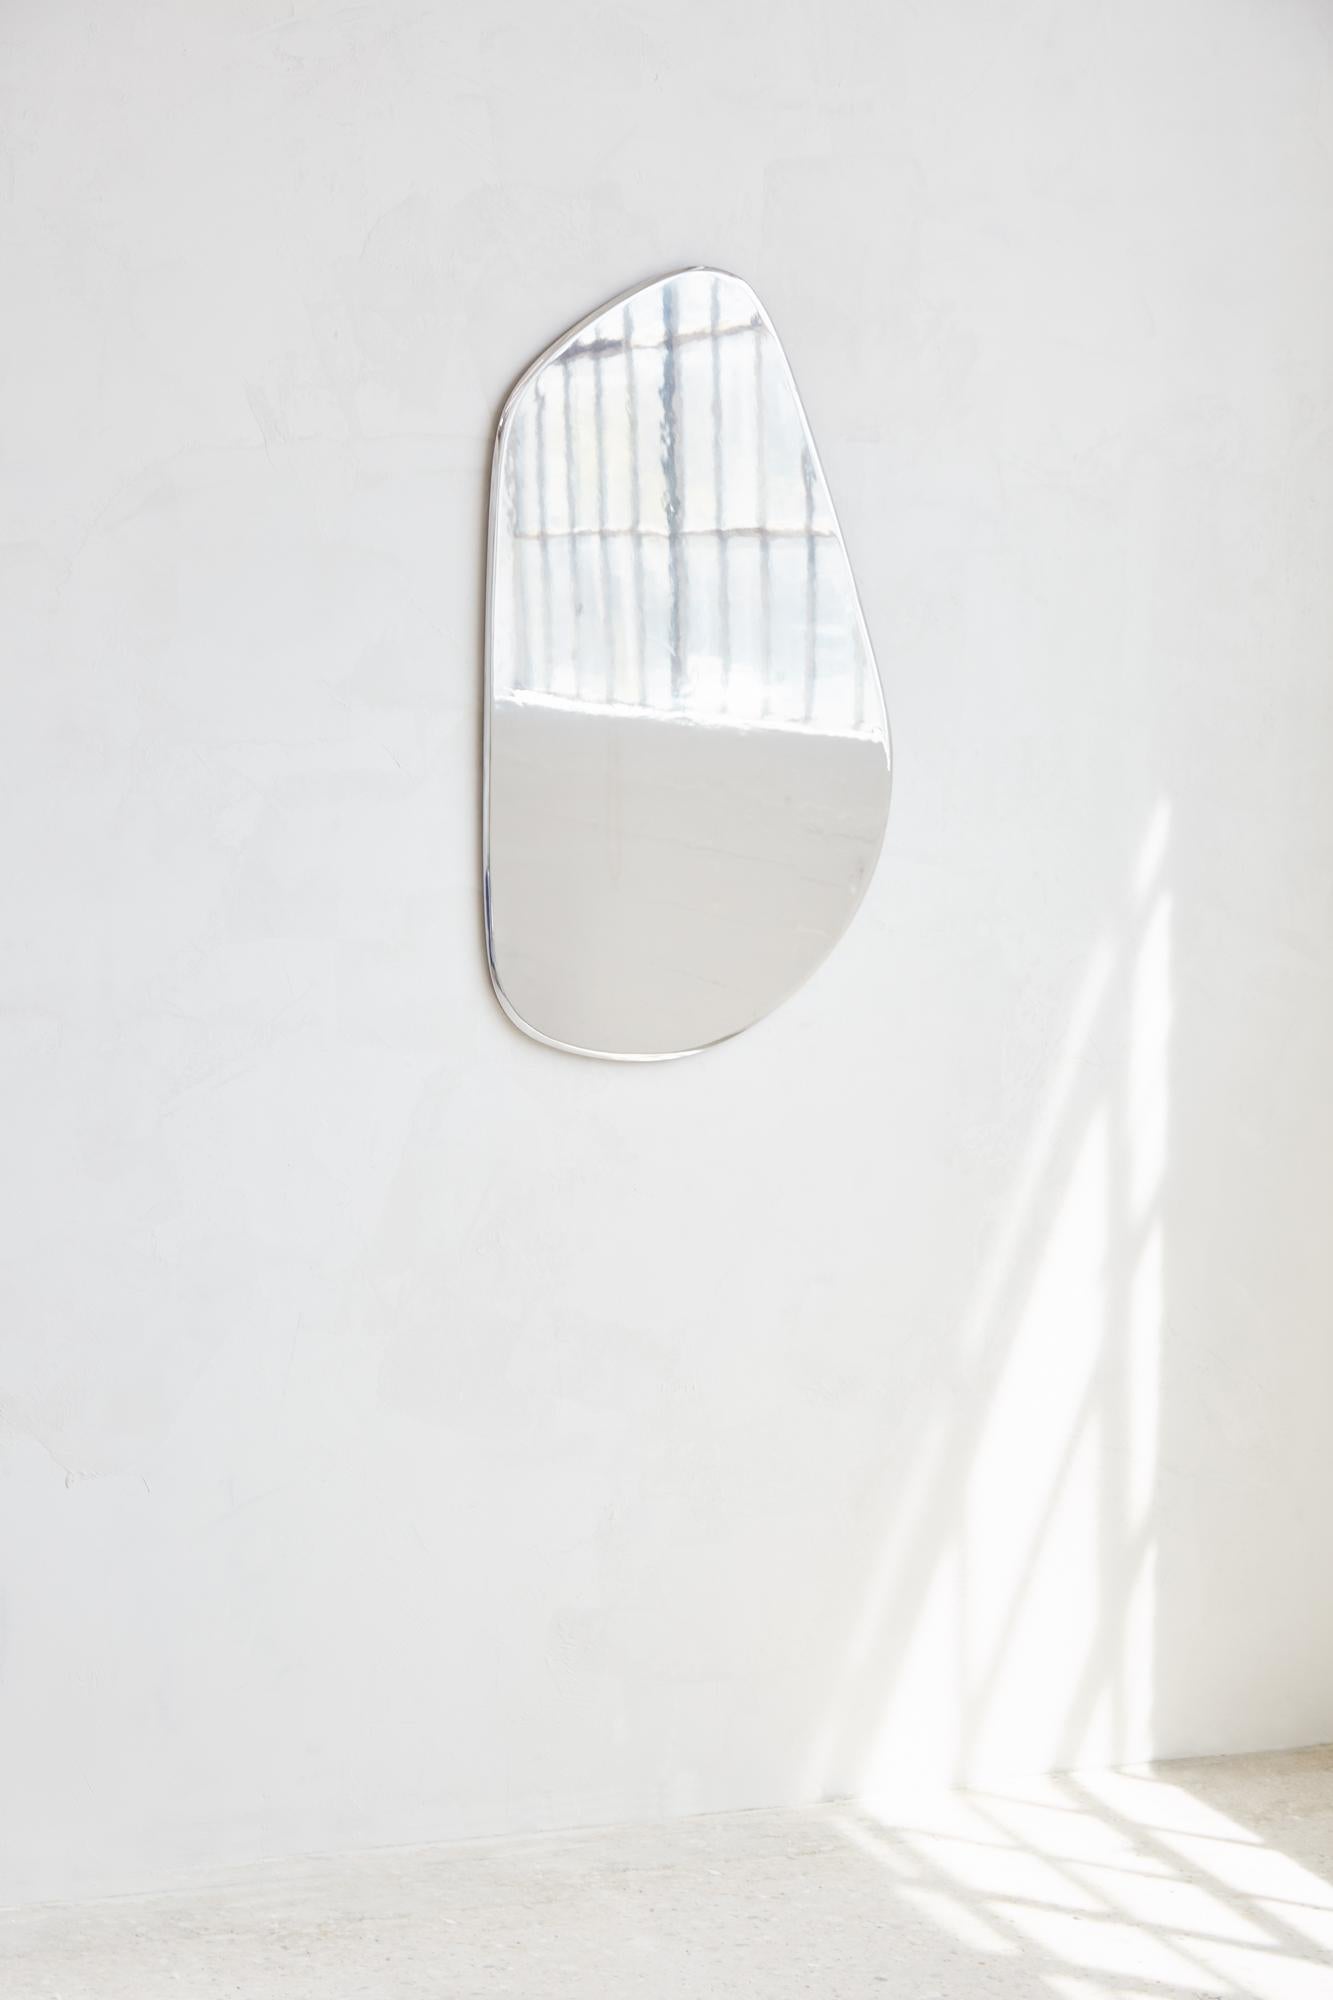 GEOMORPH MIRROR
The Geomorph Mirror is a visual break from the rest of the furnishings, echoing the same design inspiration without any visible wood components. Fabricated from polished aluminum as opposed to glass, the Mirror reminds the viewer